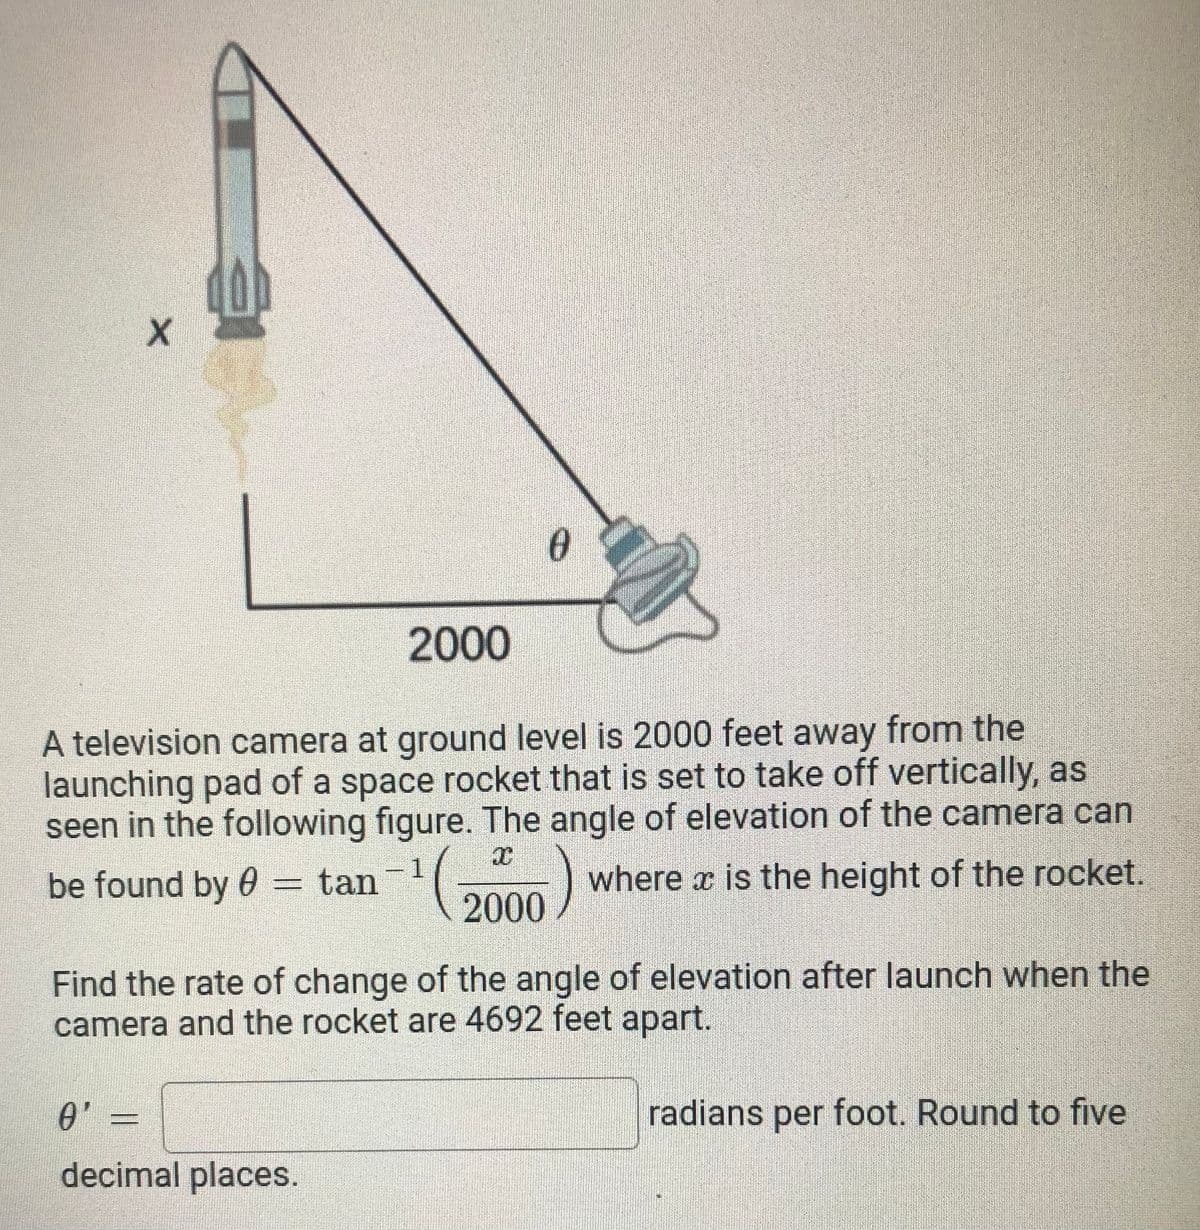 2000
A television camera at ground level is 2000 feet away from the
launching pad of a space rocket that is set to take off vertically, as
seen in the following figure. The angle of elevation of the camera can
be found by 0 = tan
-1
(2000)
where x is the height of the rocket.
Find the rate of change of the angle of elevation after launch when the
camera and the rocket are 4692 feet apart.
radians per foot. Round to five
decimal places.
